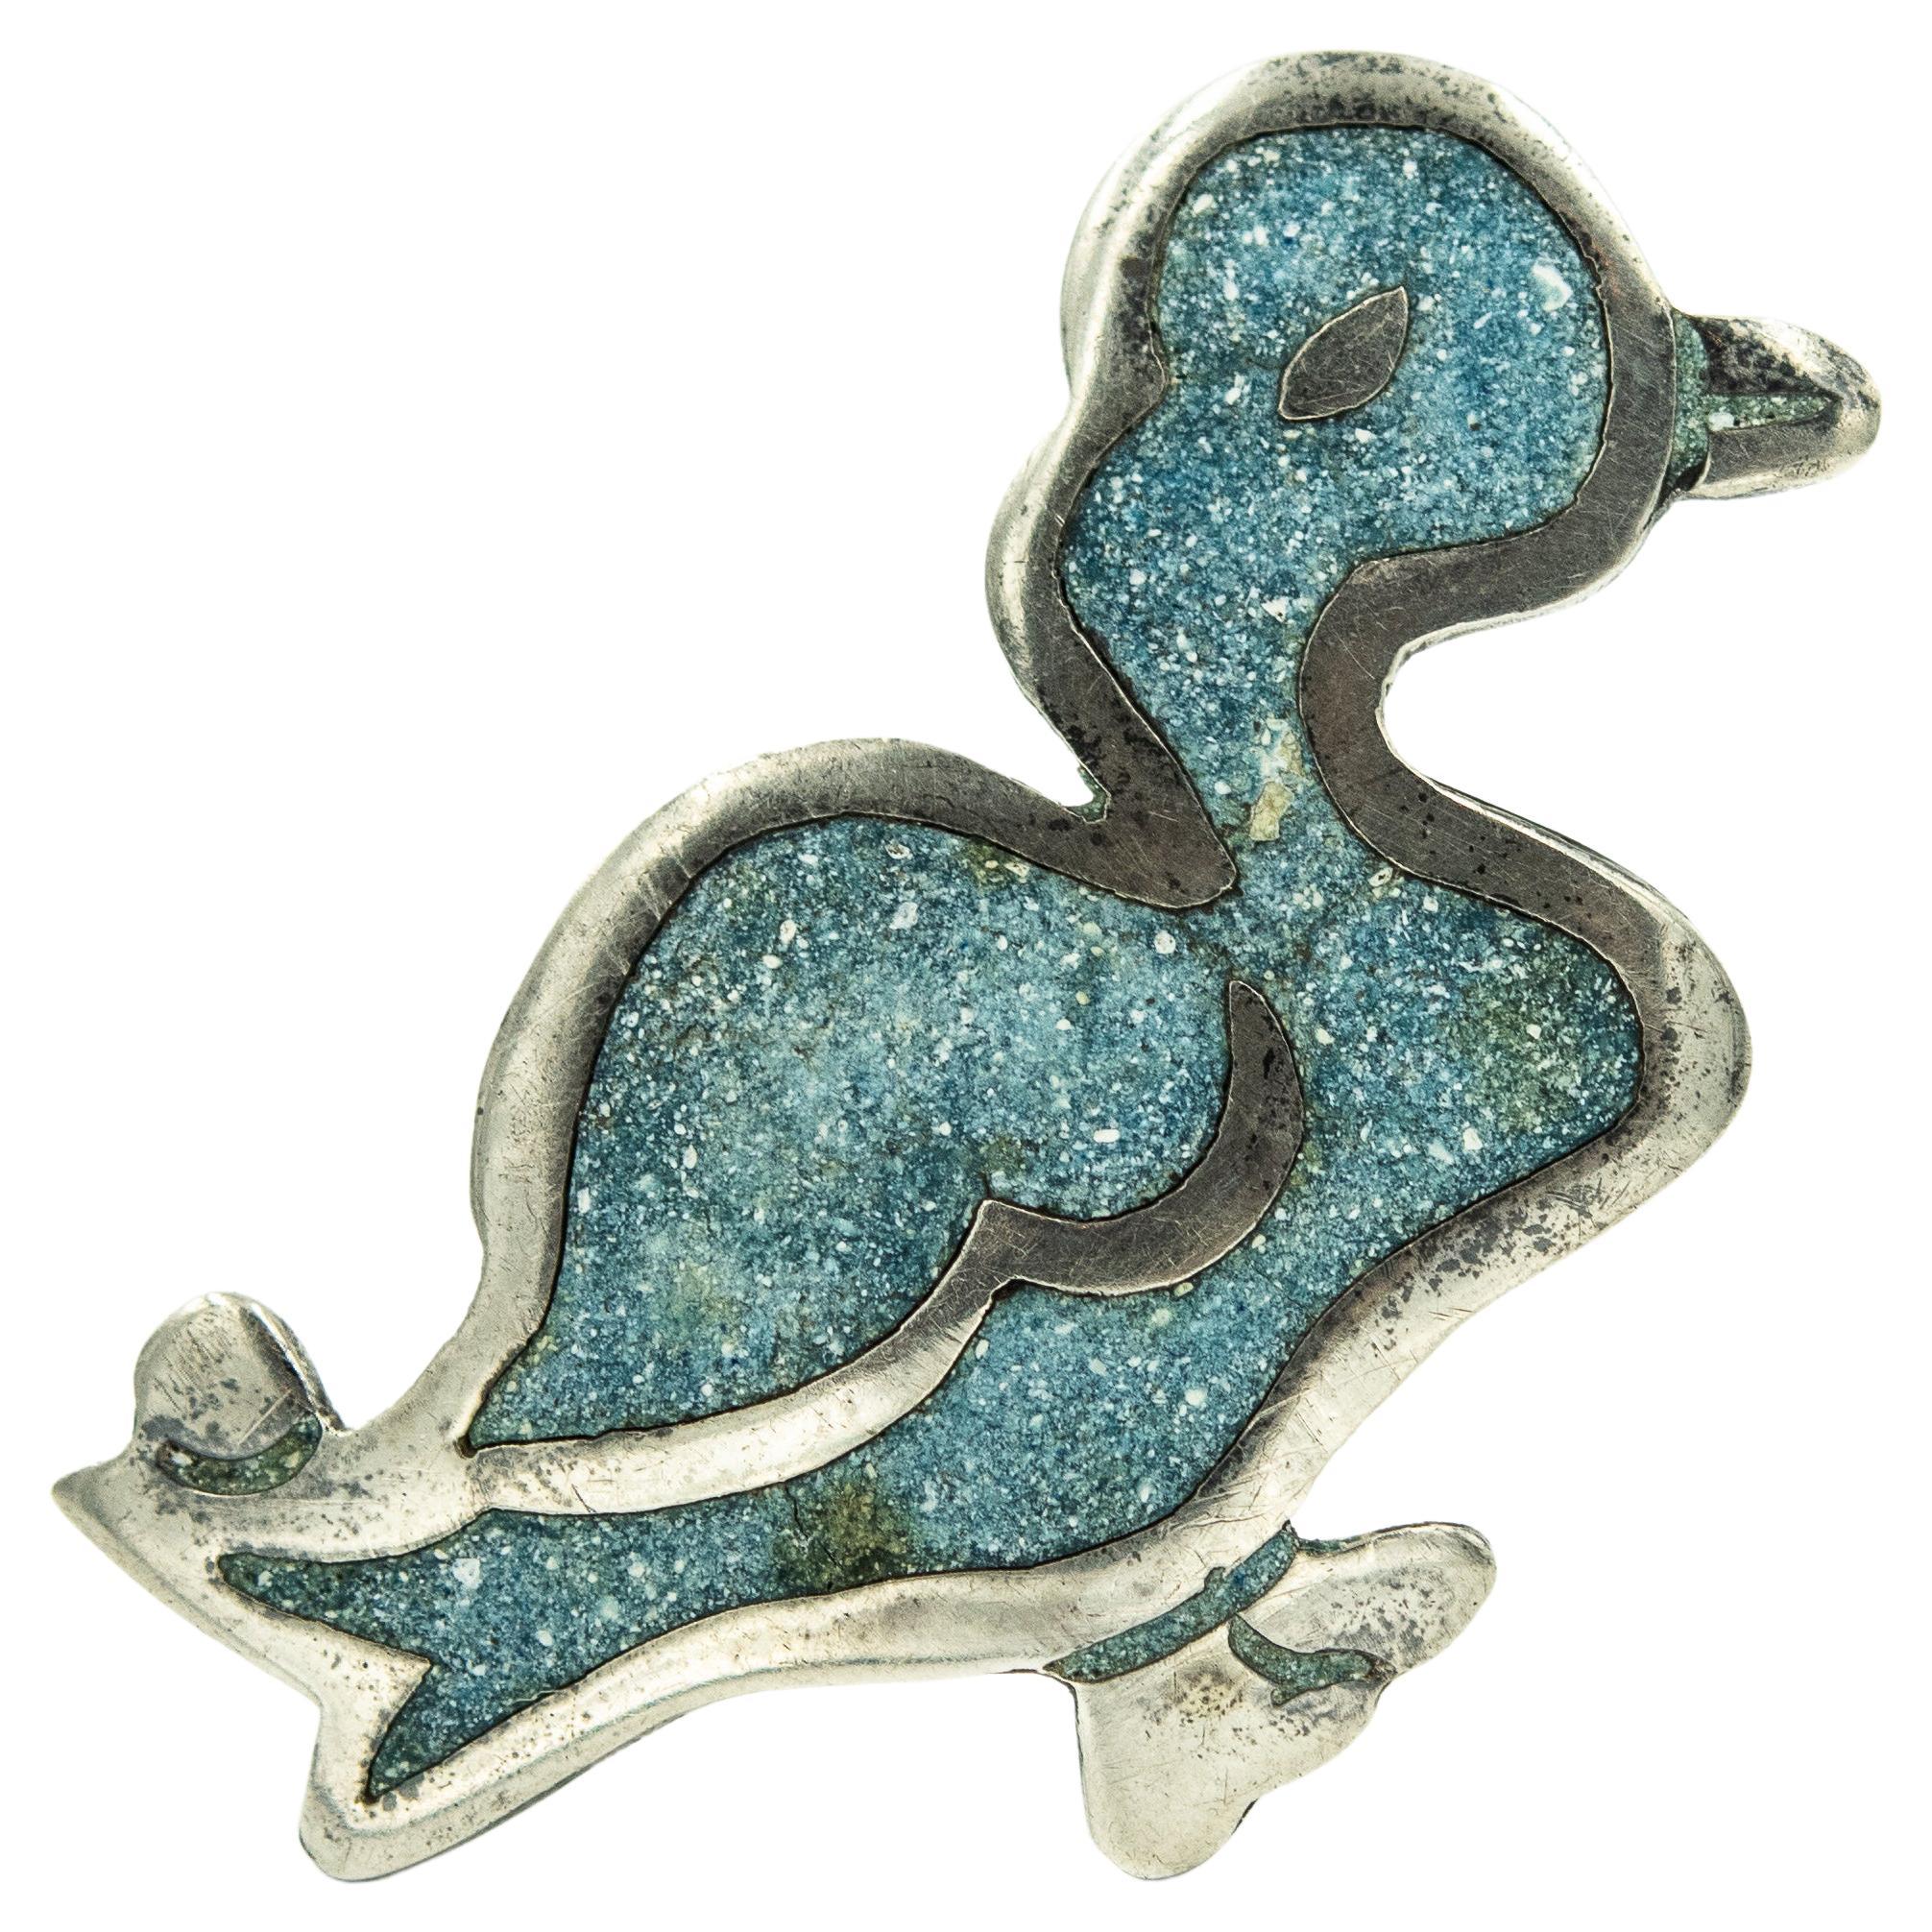 Bernice Goodspeed Mexican Sterling Silver Inlaid Gemstone Duck Brooch Pin